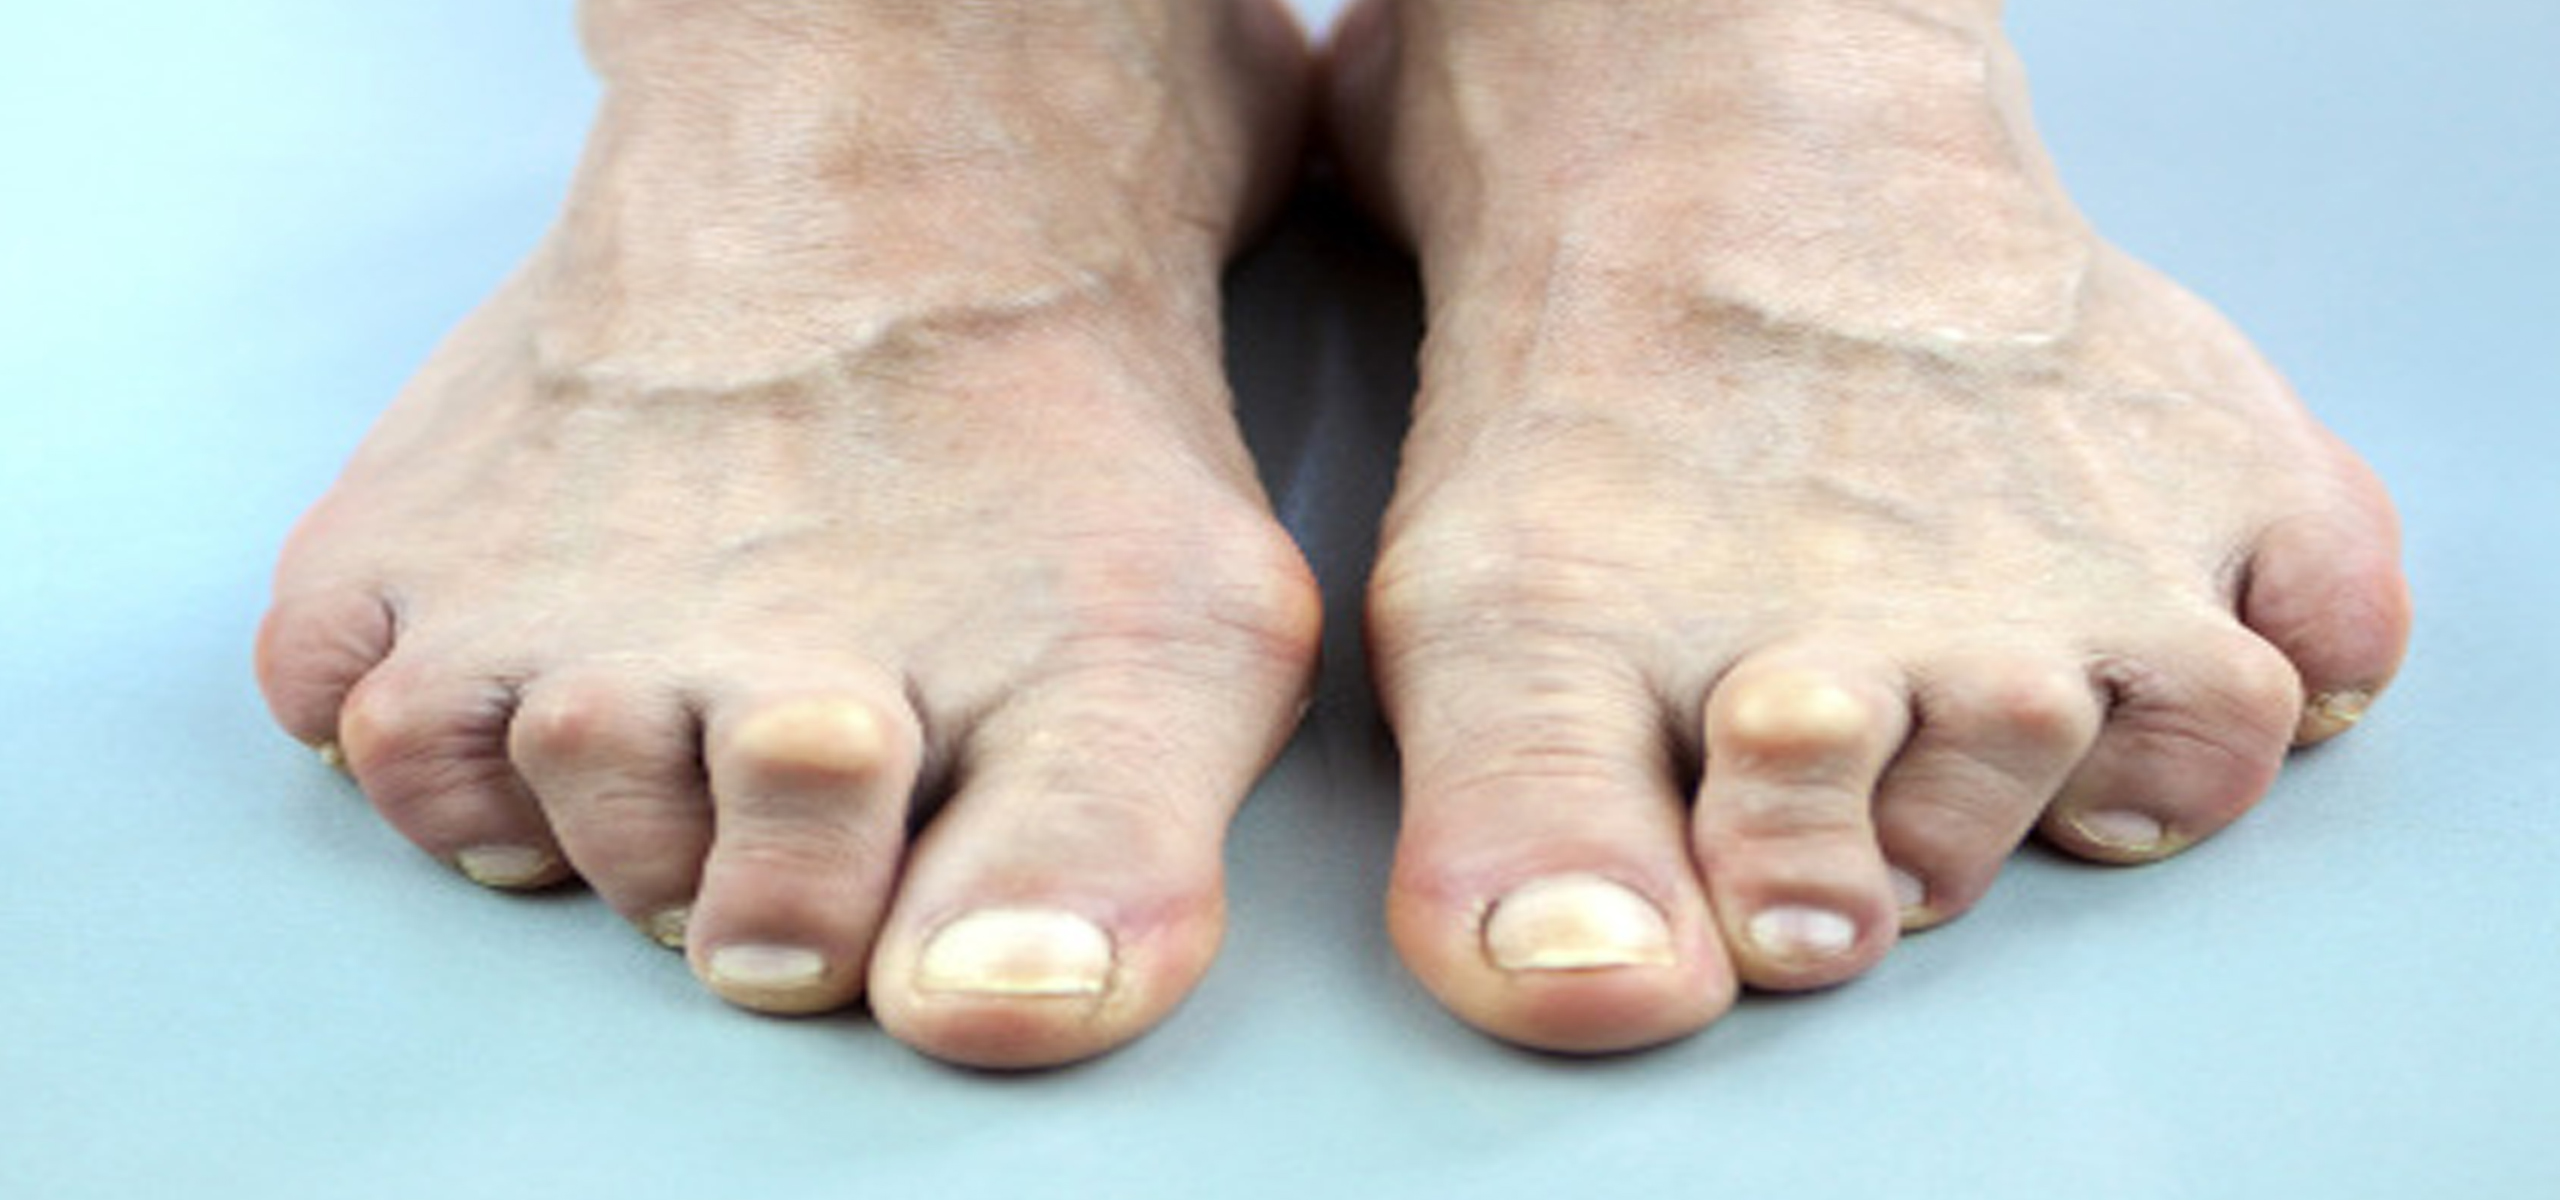 The Foot Surgery I Chiropody and Podiatry in Hornchurch, Essex